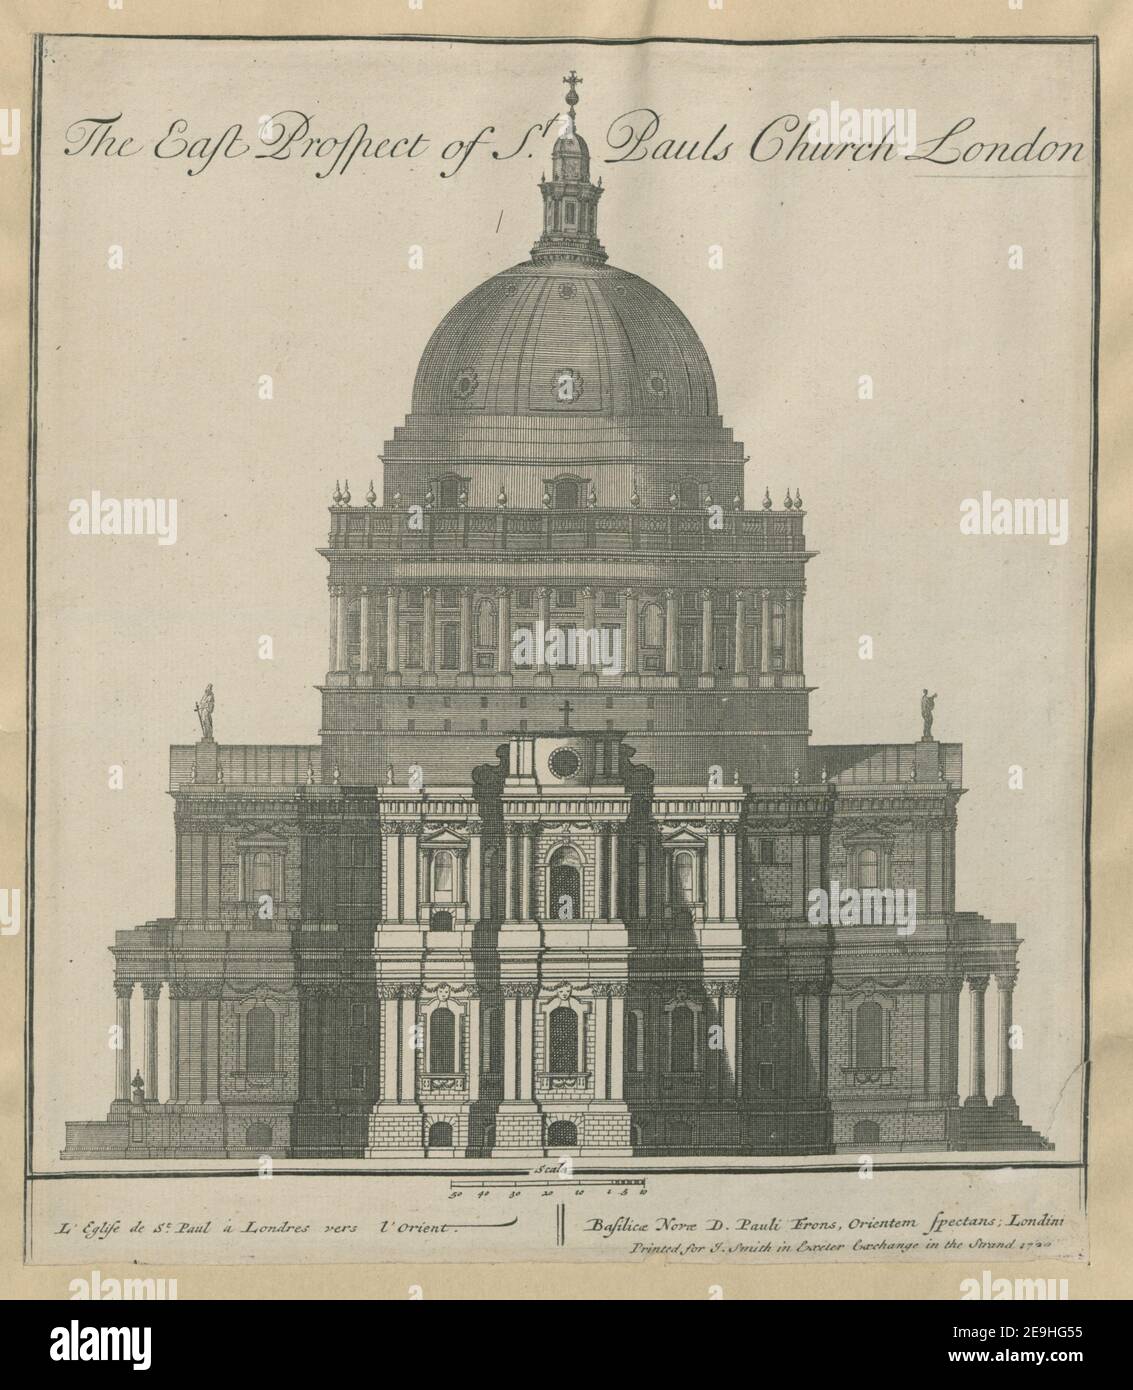 The East Prospect of Saint Paul's Church London = L'Eglise de St. Paul aÃÄ Londres vers l'Orient = Basilic√¶ Nov√¶ D. Pauli Frons, Orientem Spectans Londini. Visual Material information:  Title: The East Prospect of Saint Paul's Church London = L'Eglise de St. Paul aÃÄ Londres vers l'Orient = Basilic√¶ Nov√¶ D. Pauli Frons, Orientem Spectans; Londini. 23.35.k. Place of publication: [London] Publisher: Printed for J Smith in Exeter Exchange in the Strand, Date of publication: 1720.  Item type: 1 print Medium: etching and engraving Dimensions: sheet 25.2 x 22.1 cm Stock Photo